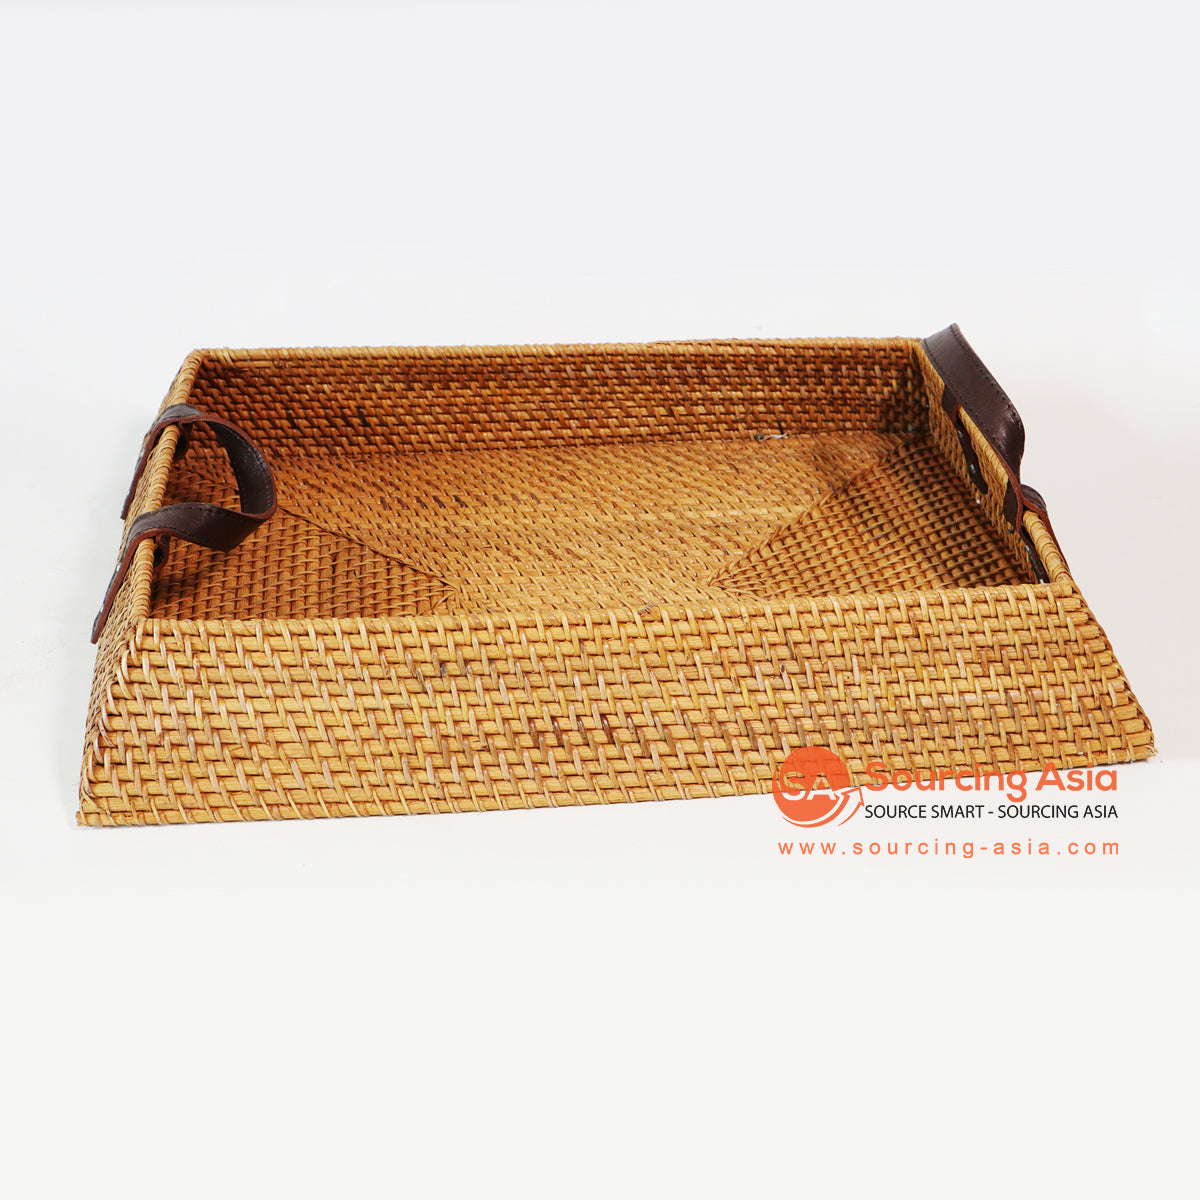 MTIC028-1 NATURAL WOVEN RATTAN SQUARE TRAY WITH LEATHER HANDLE